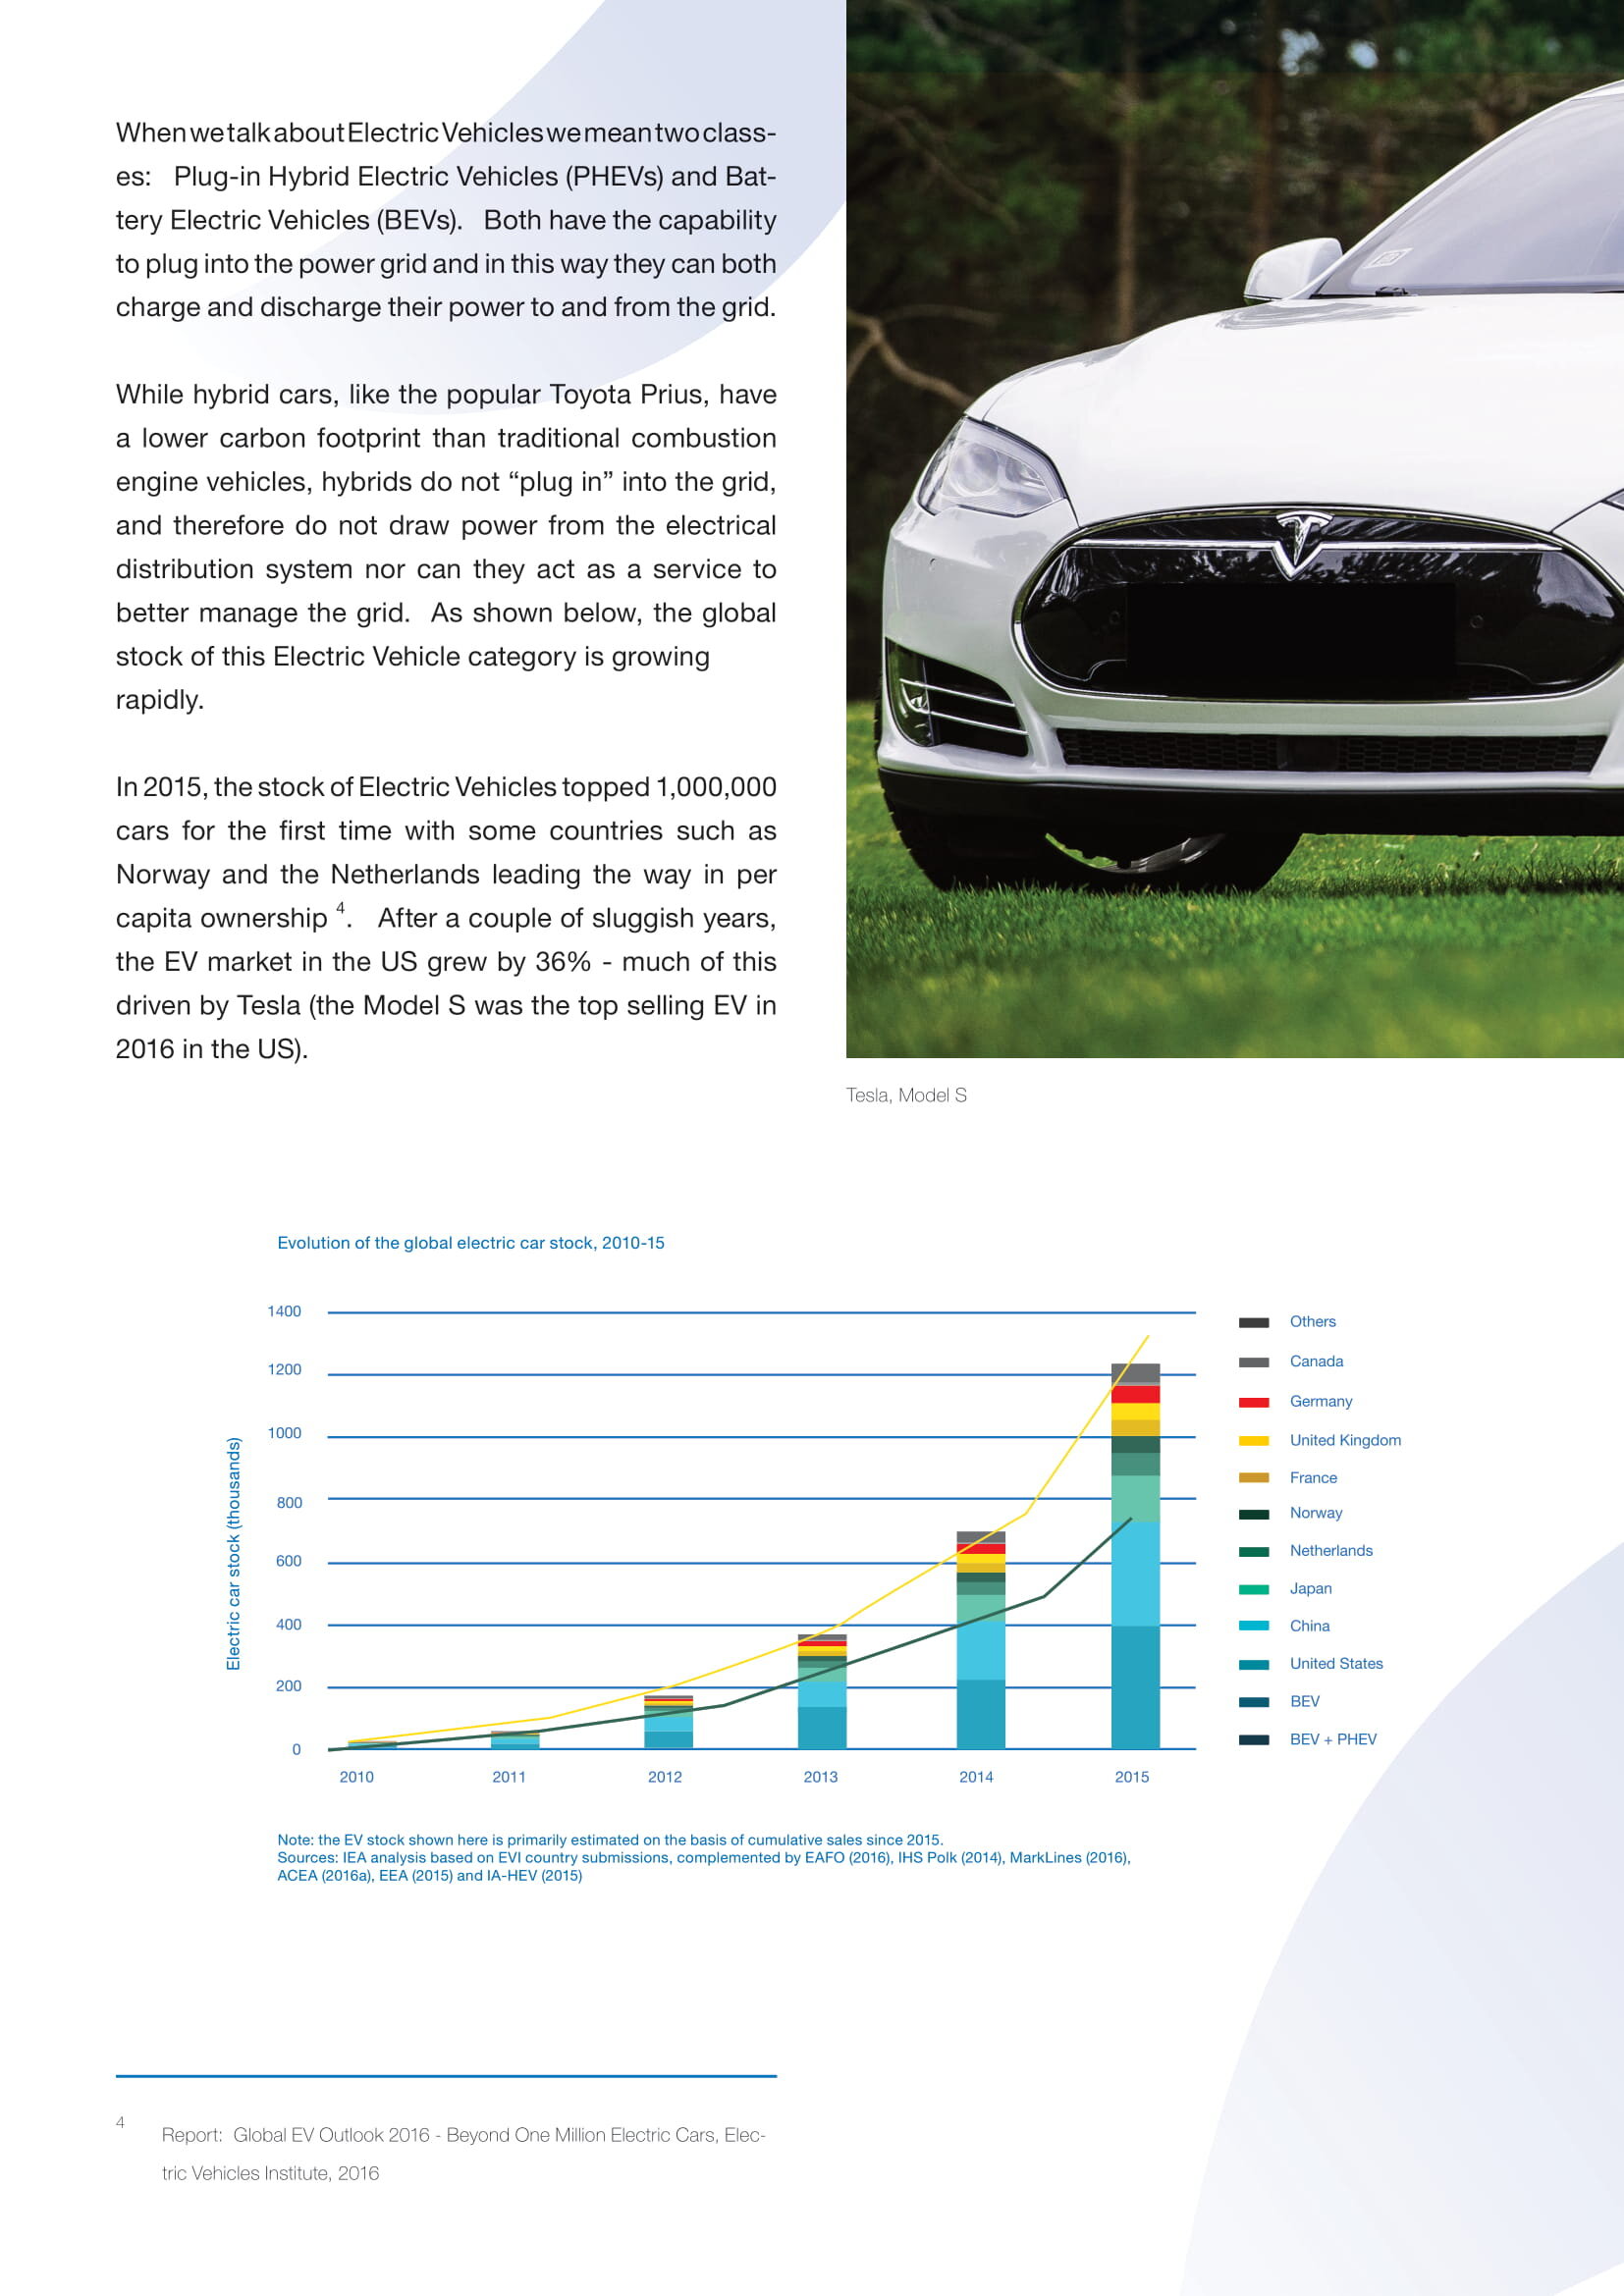 Electric Vehicles - a Killer App for Utilities-03.jpg